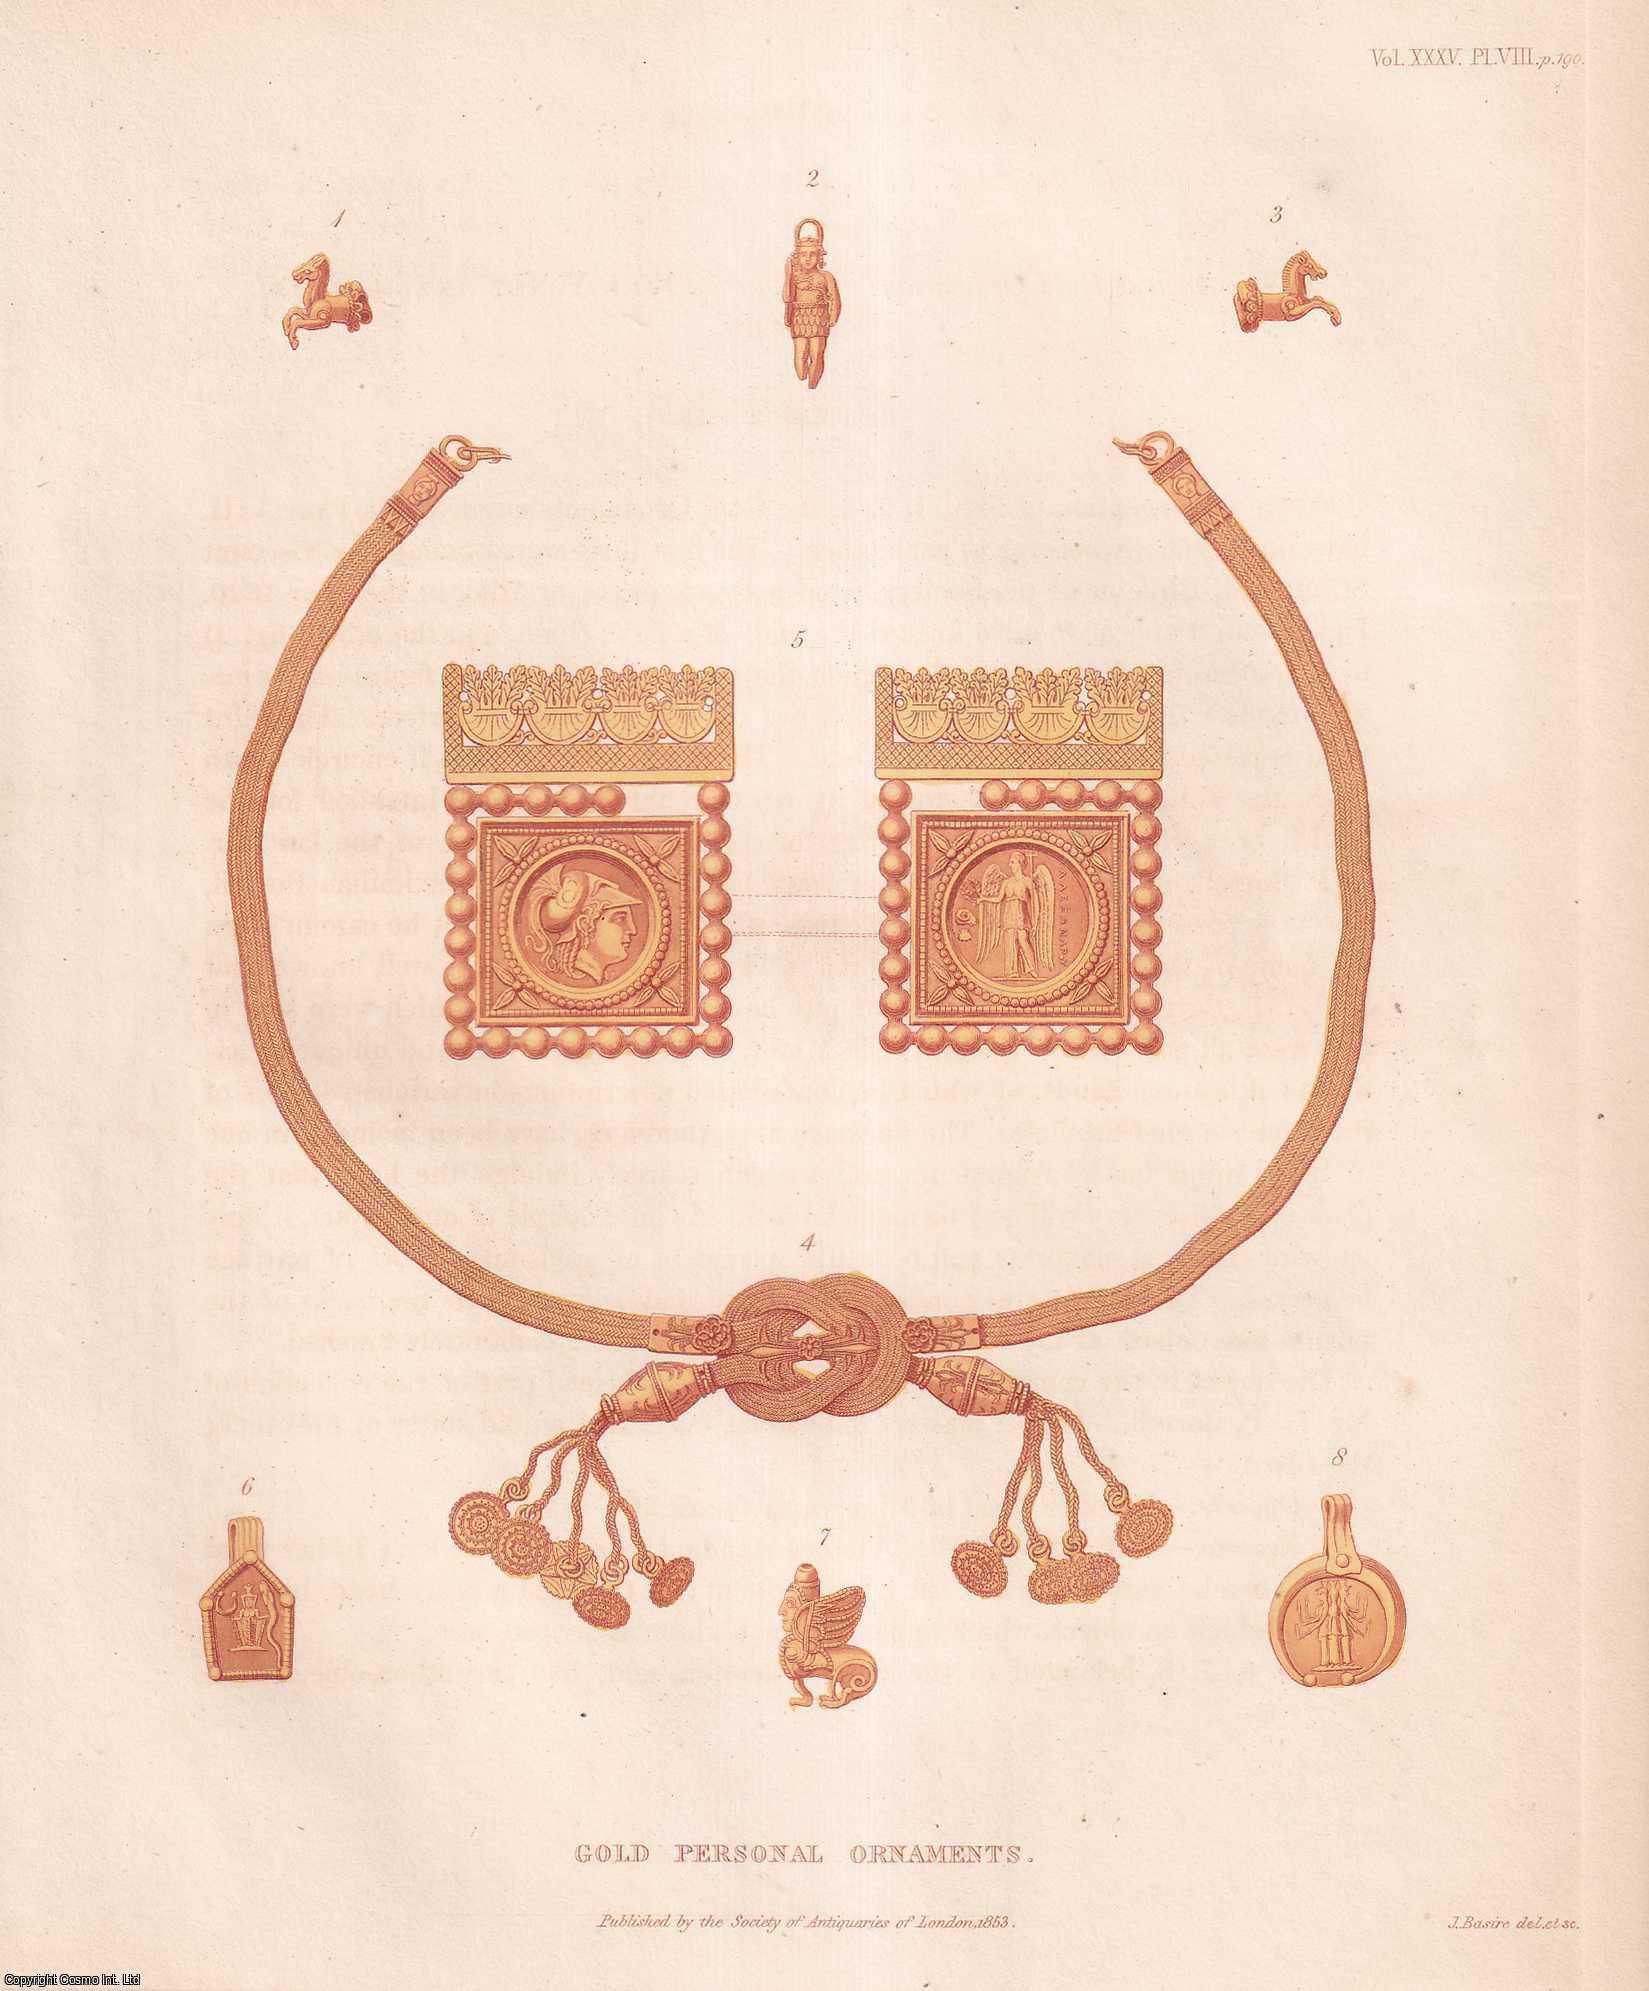 John Yonge Akerman, Esq. - Ancient Gold Ornaments. An uncommon original article from the journal Archaeologia, 1853.